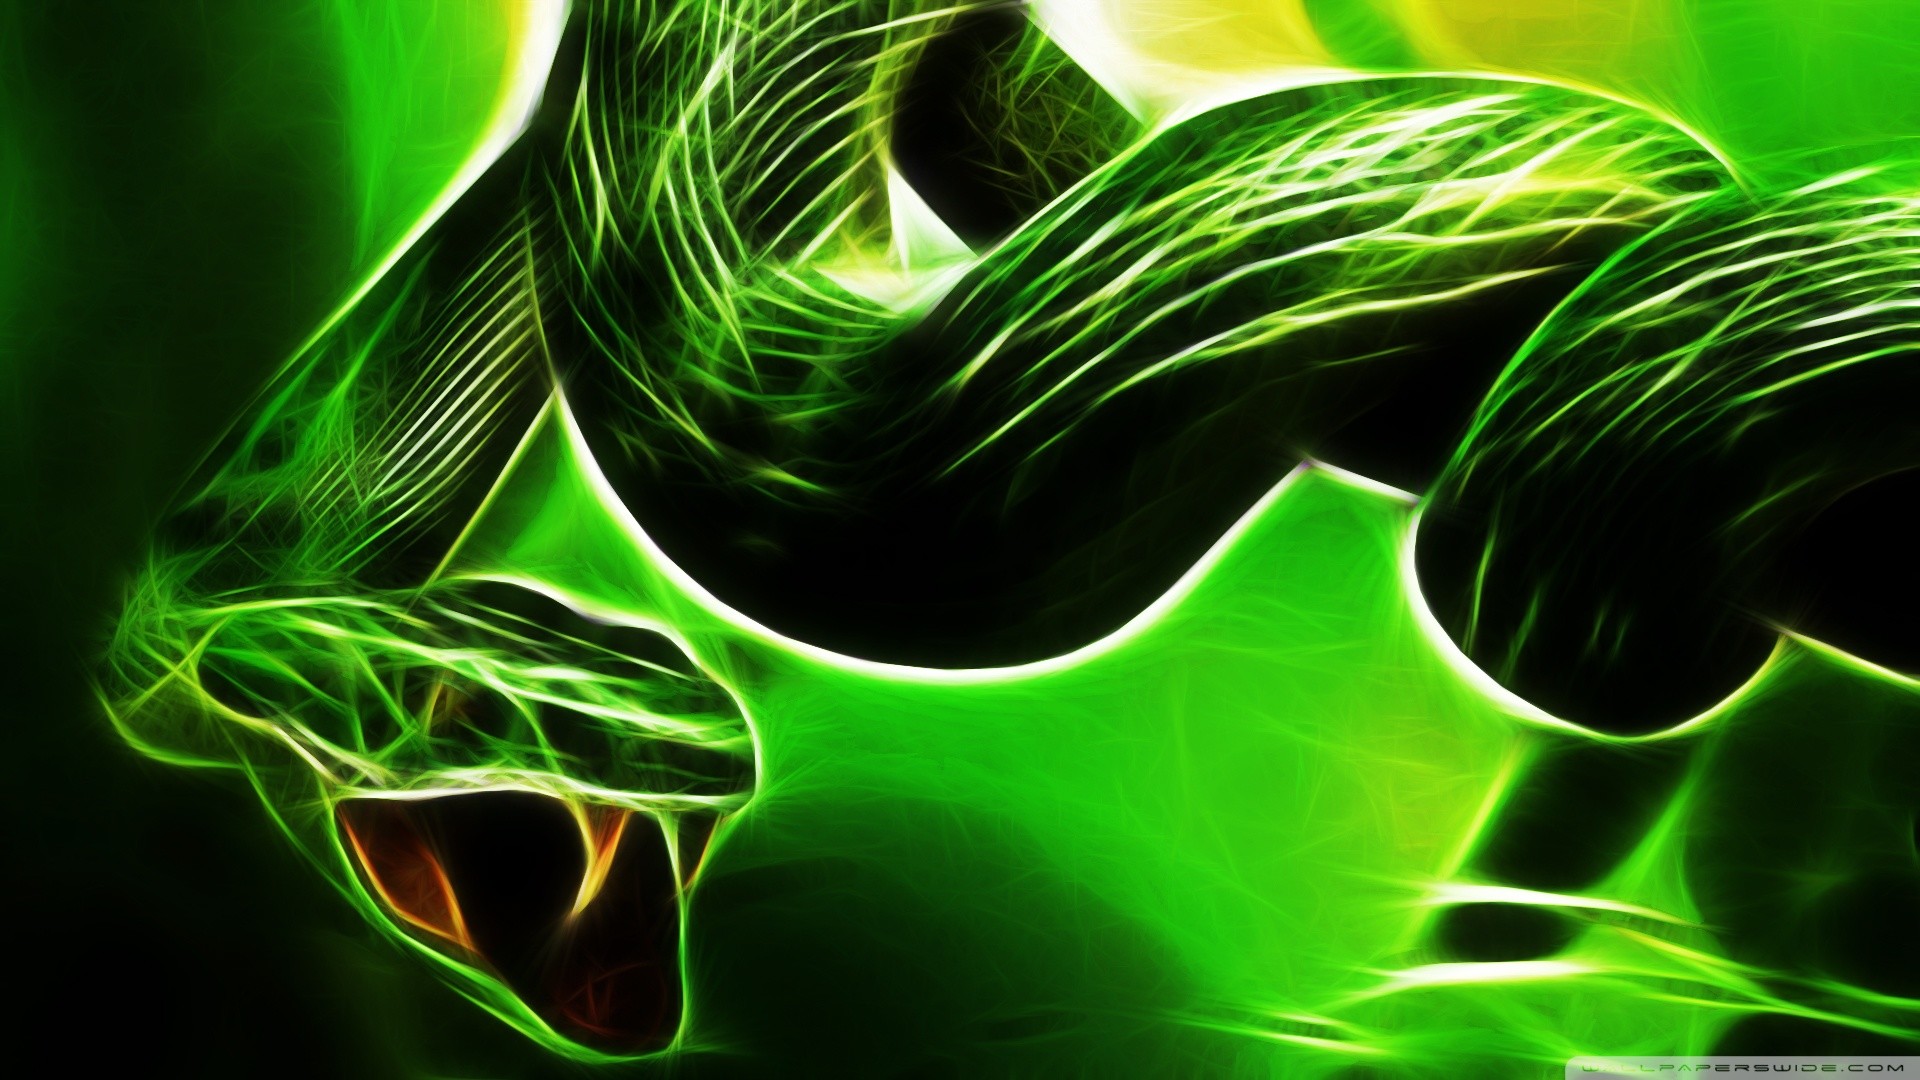 1920x1080 299 Snake HD Wallpapers | Backgrounds - Wallpaper Abyss ...